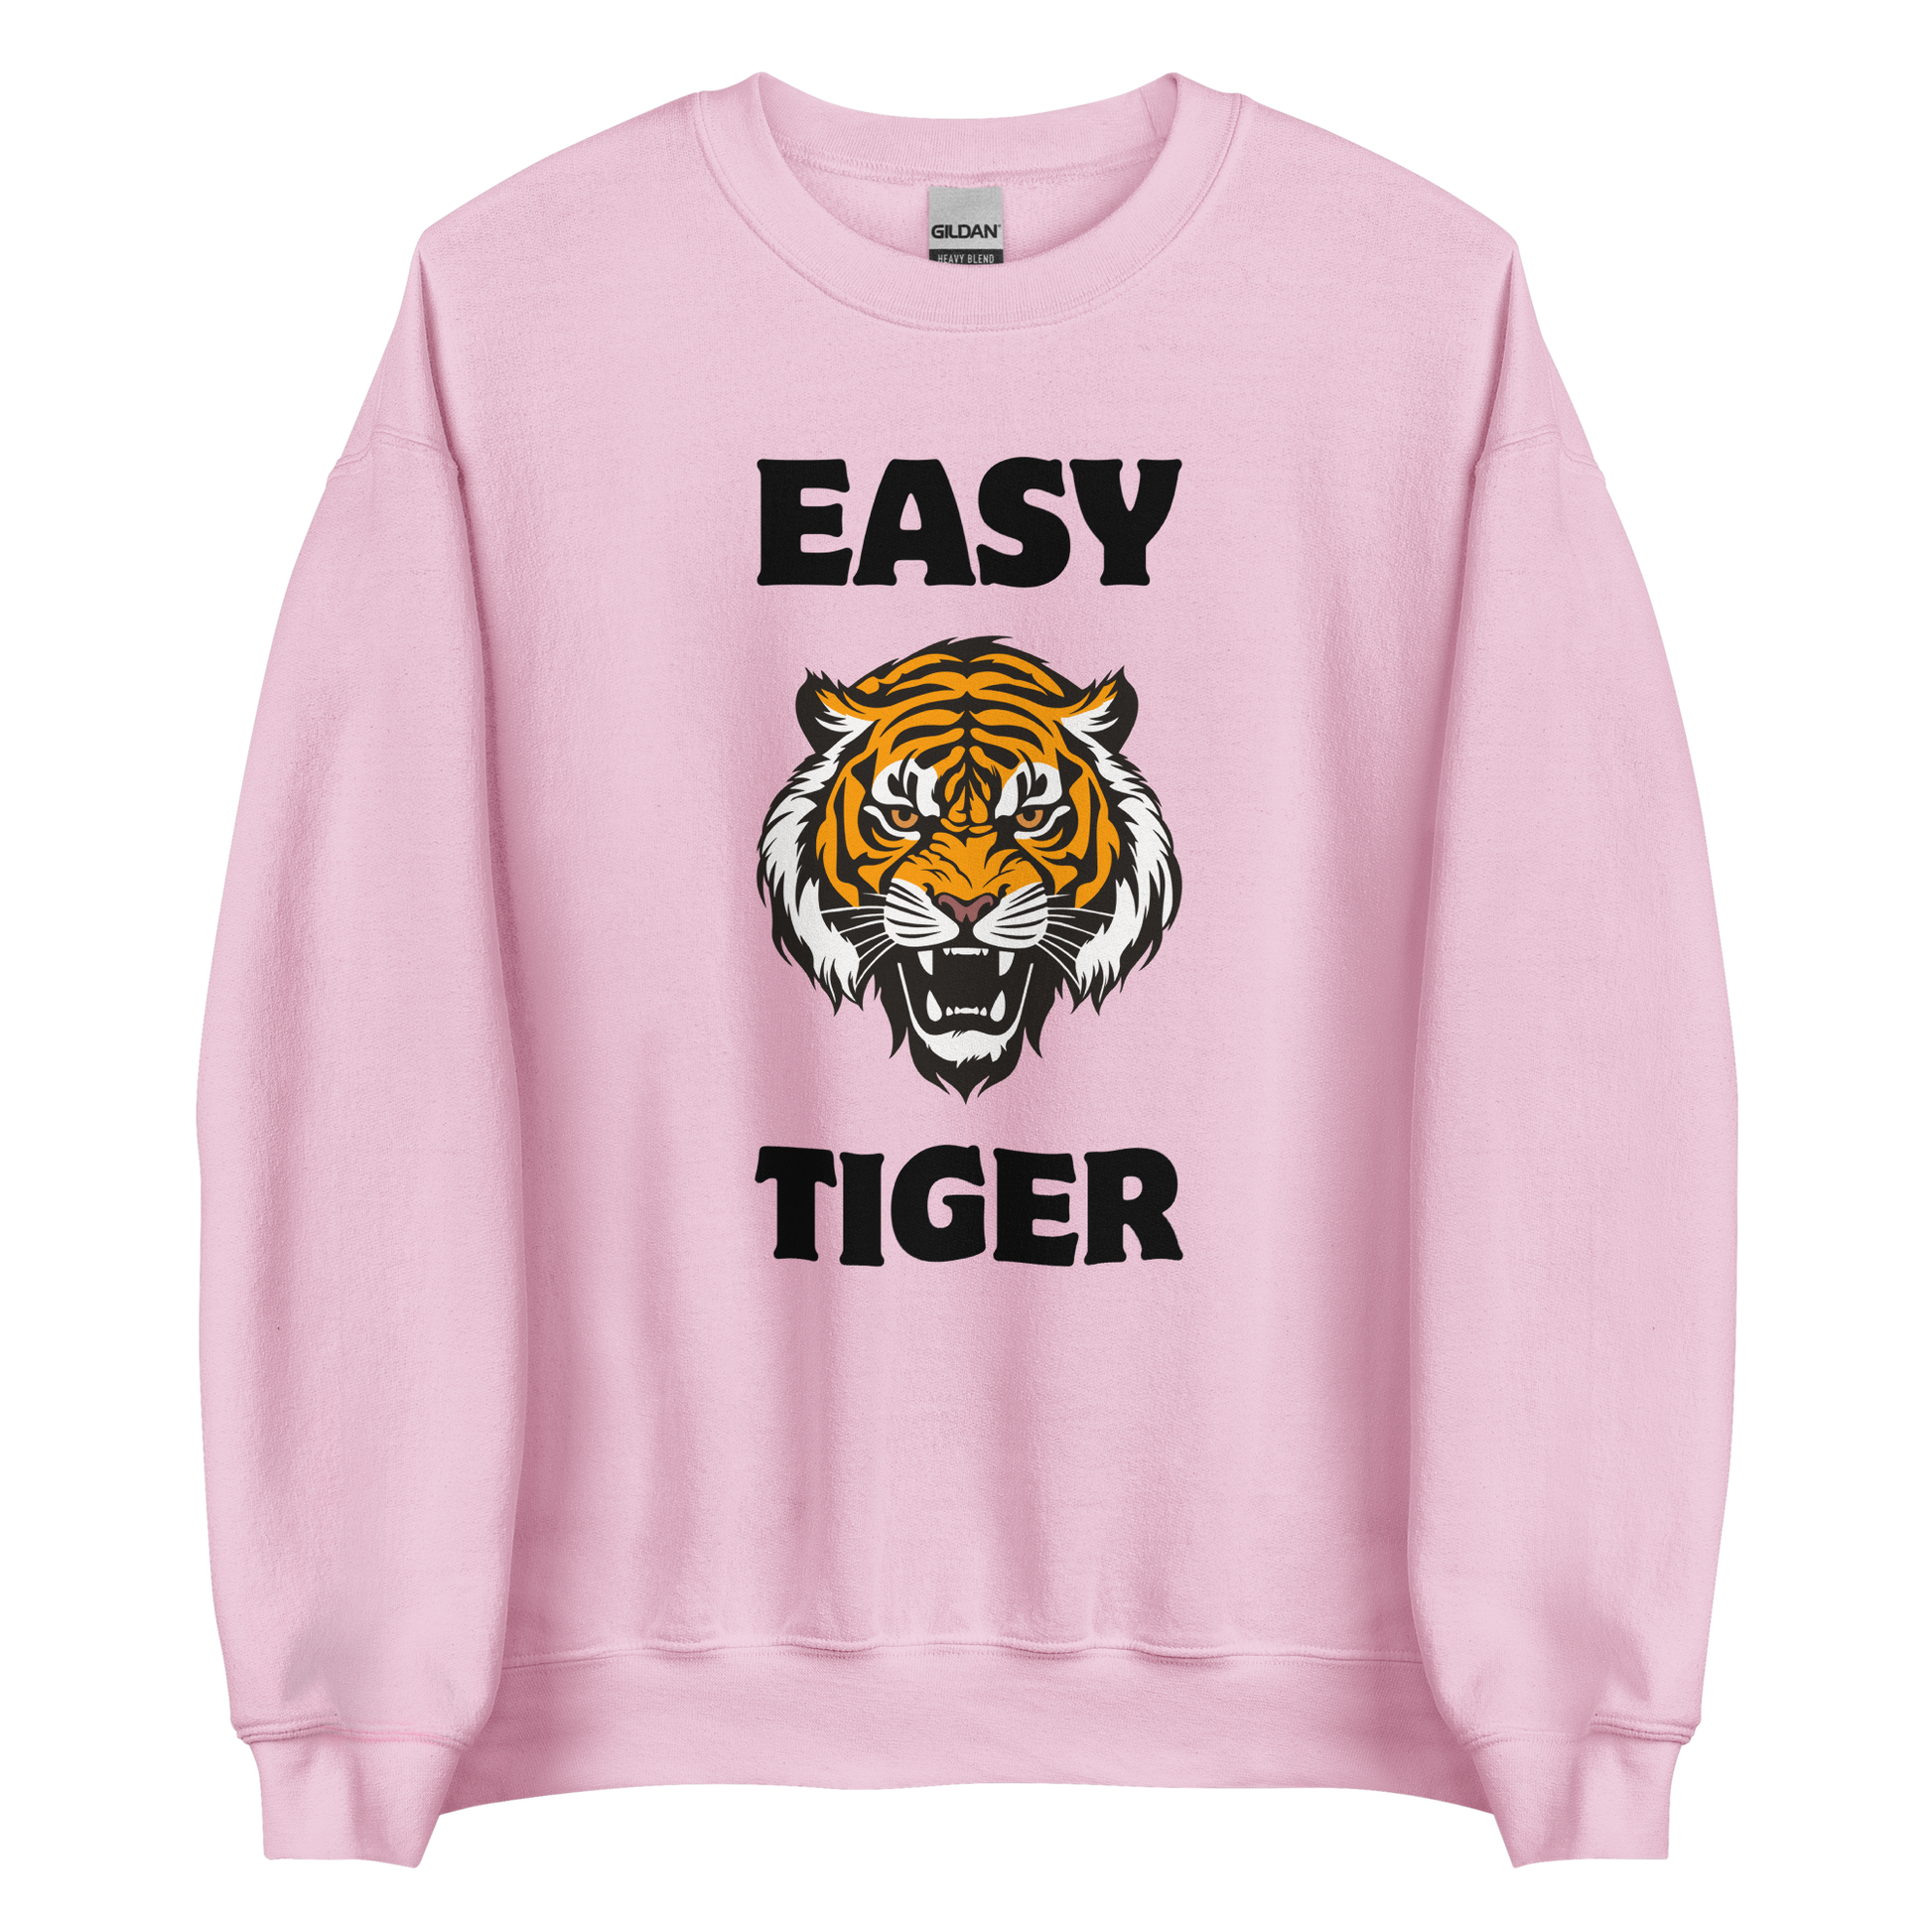 Light Pink Tiger Sweatshirt featuring a Easy Tiger graphic on the chest - Funny Graphic Tiger Sweatshirts - Boozy Fox